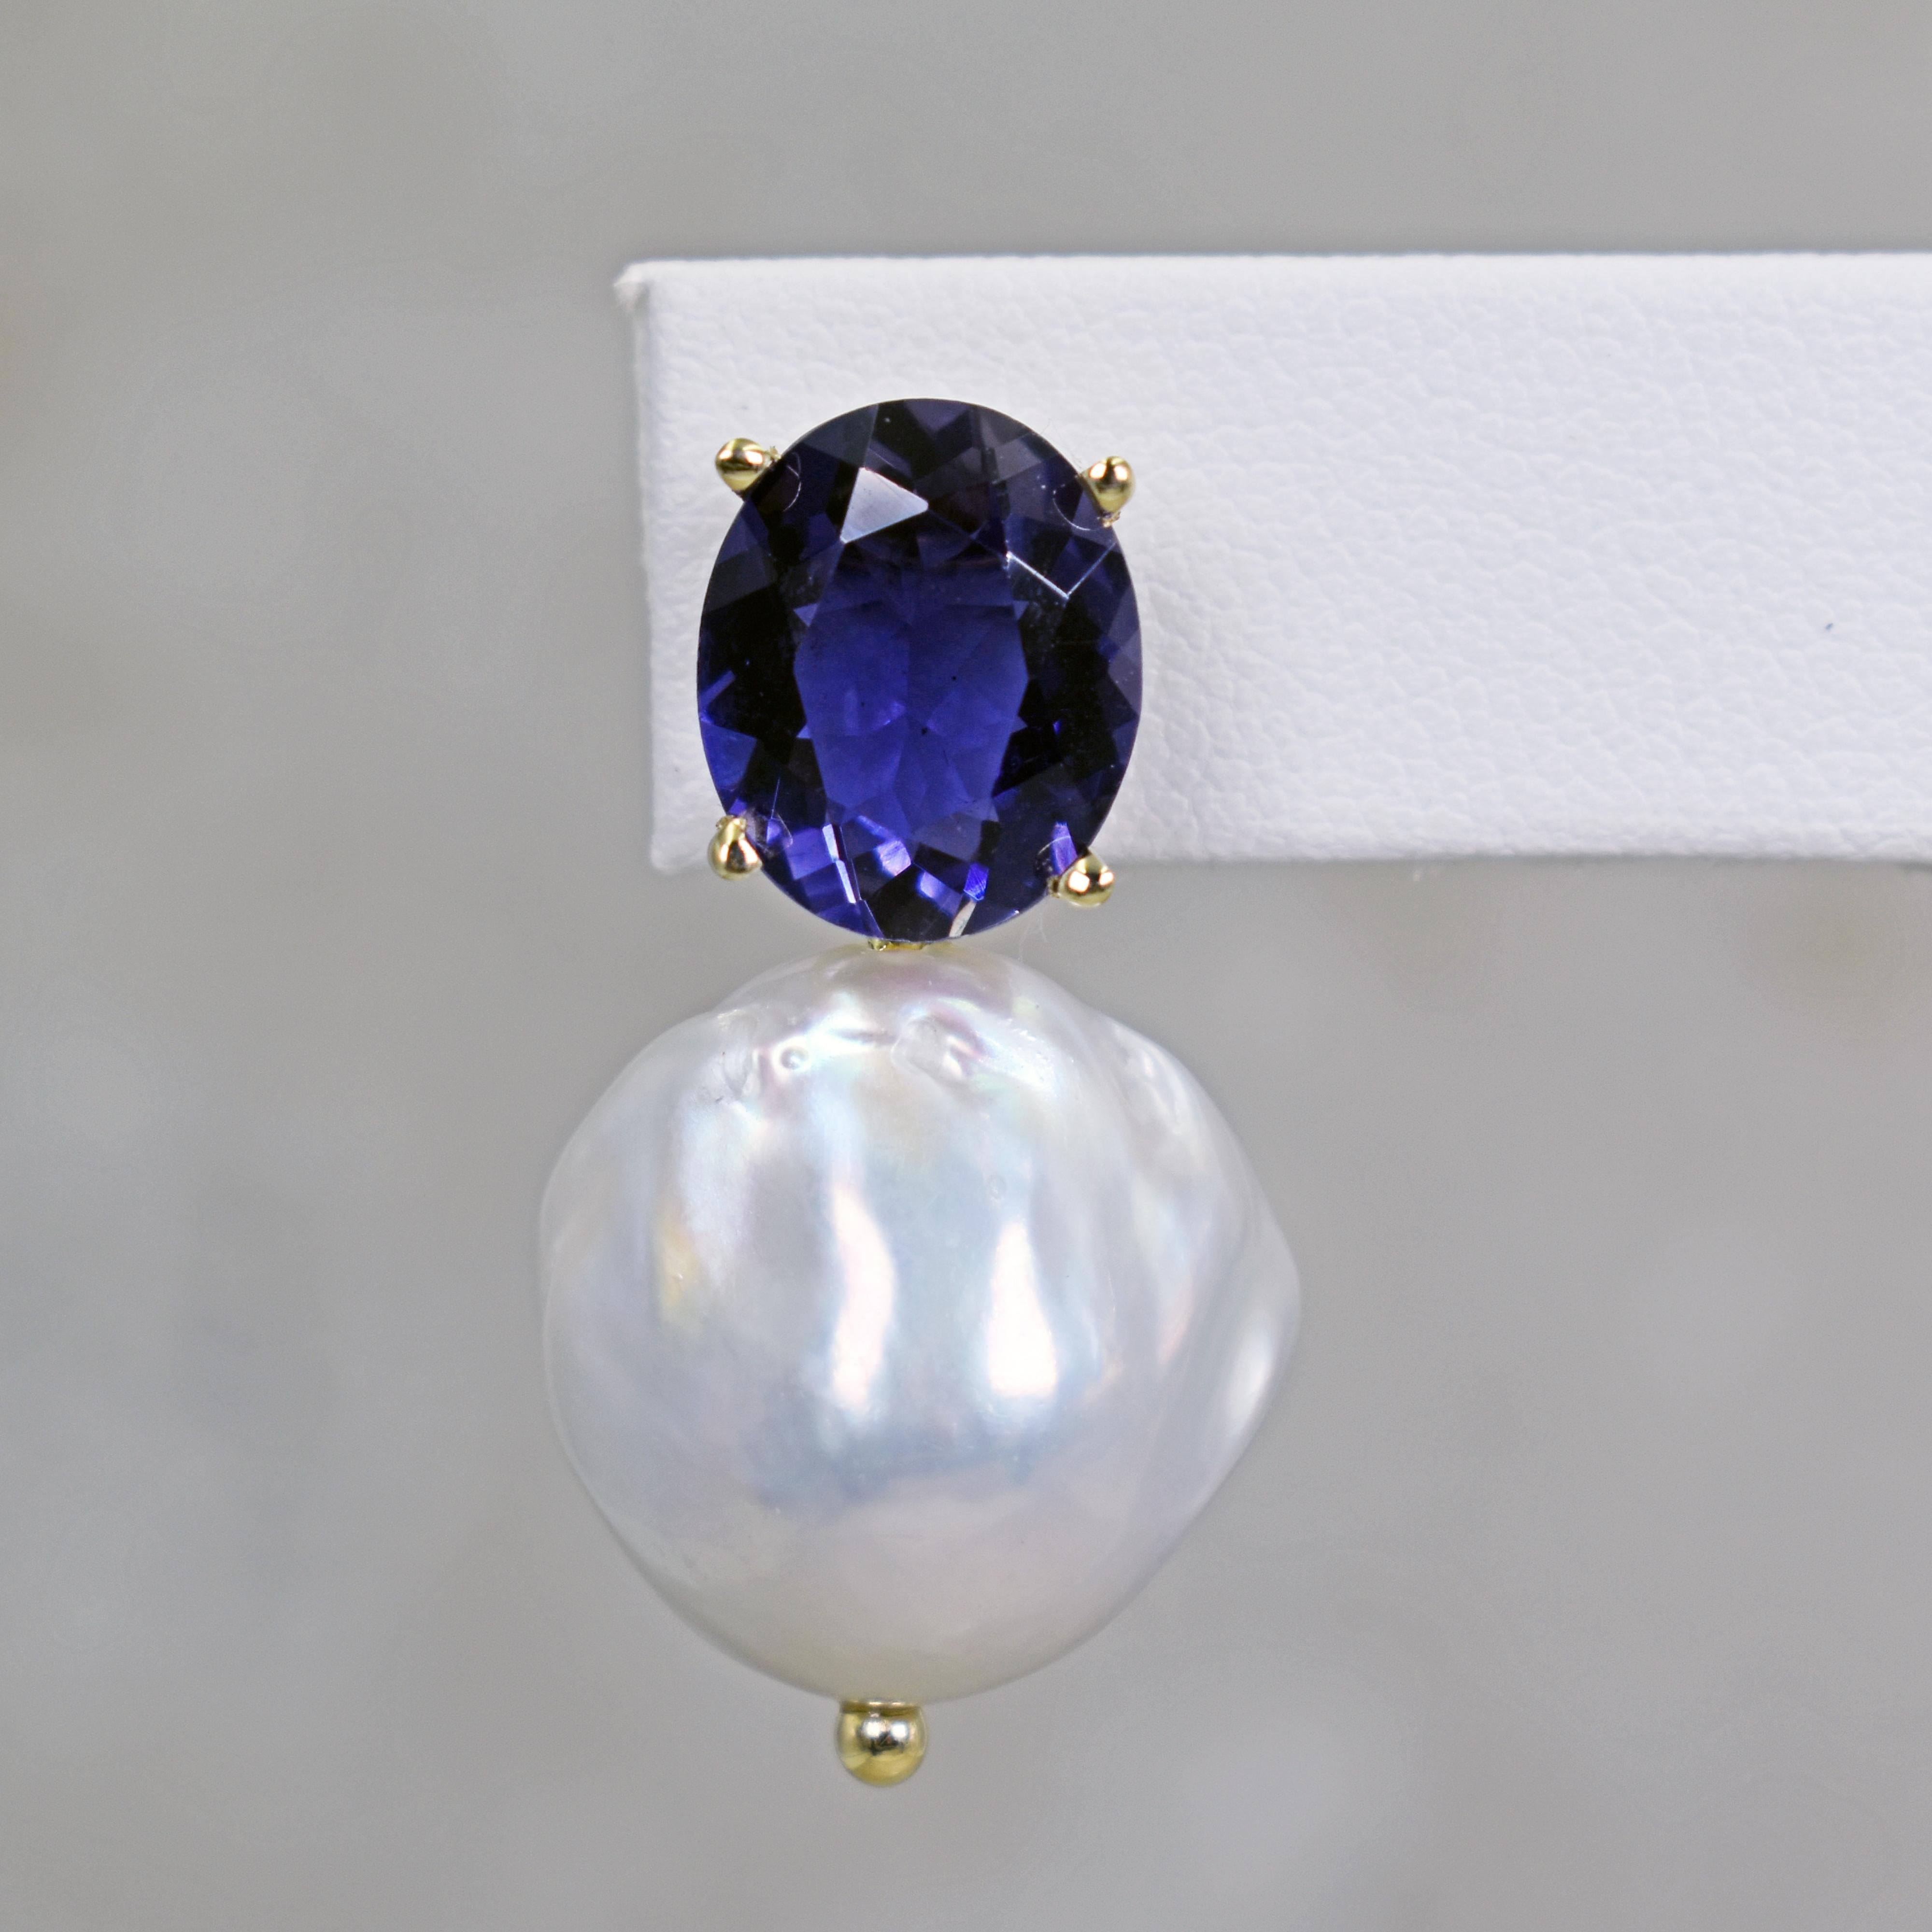 Gorgeous and unique 14k yellow gold stud earrings featuring two oval-cut Iolite gemstones, totaling 6.88 carats, and Freshwater Baroque Pearls. Stud earrings are 1.32 inches or 33 mm in length. These artisan drop earrings have timeless beauty with a